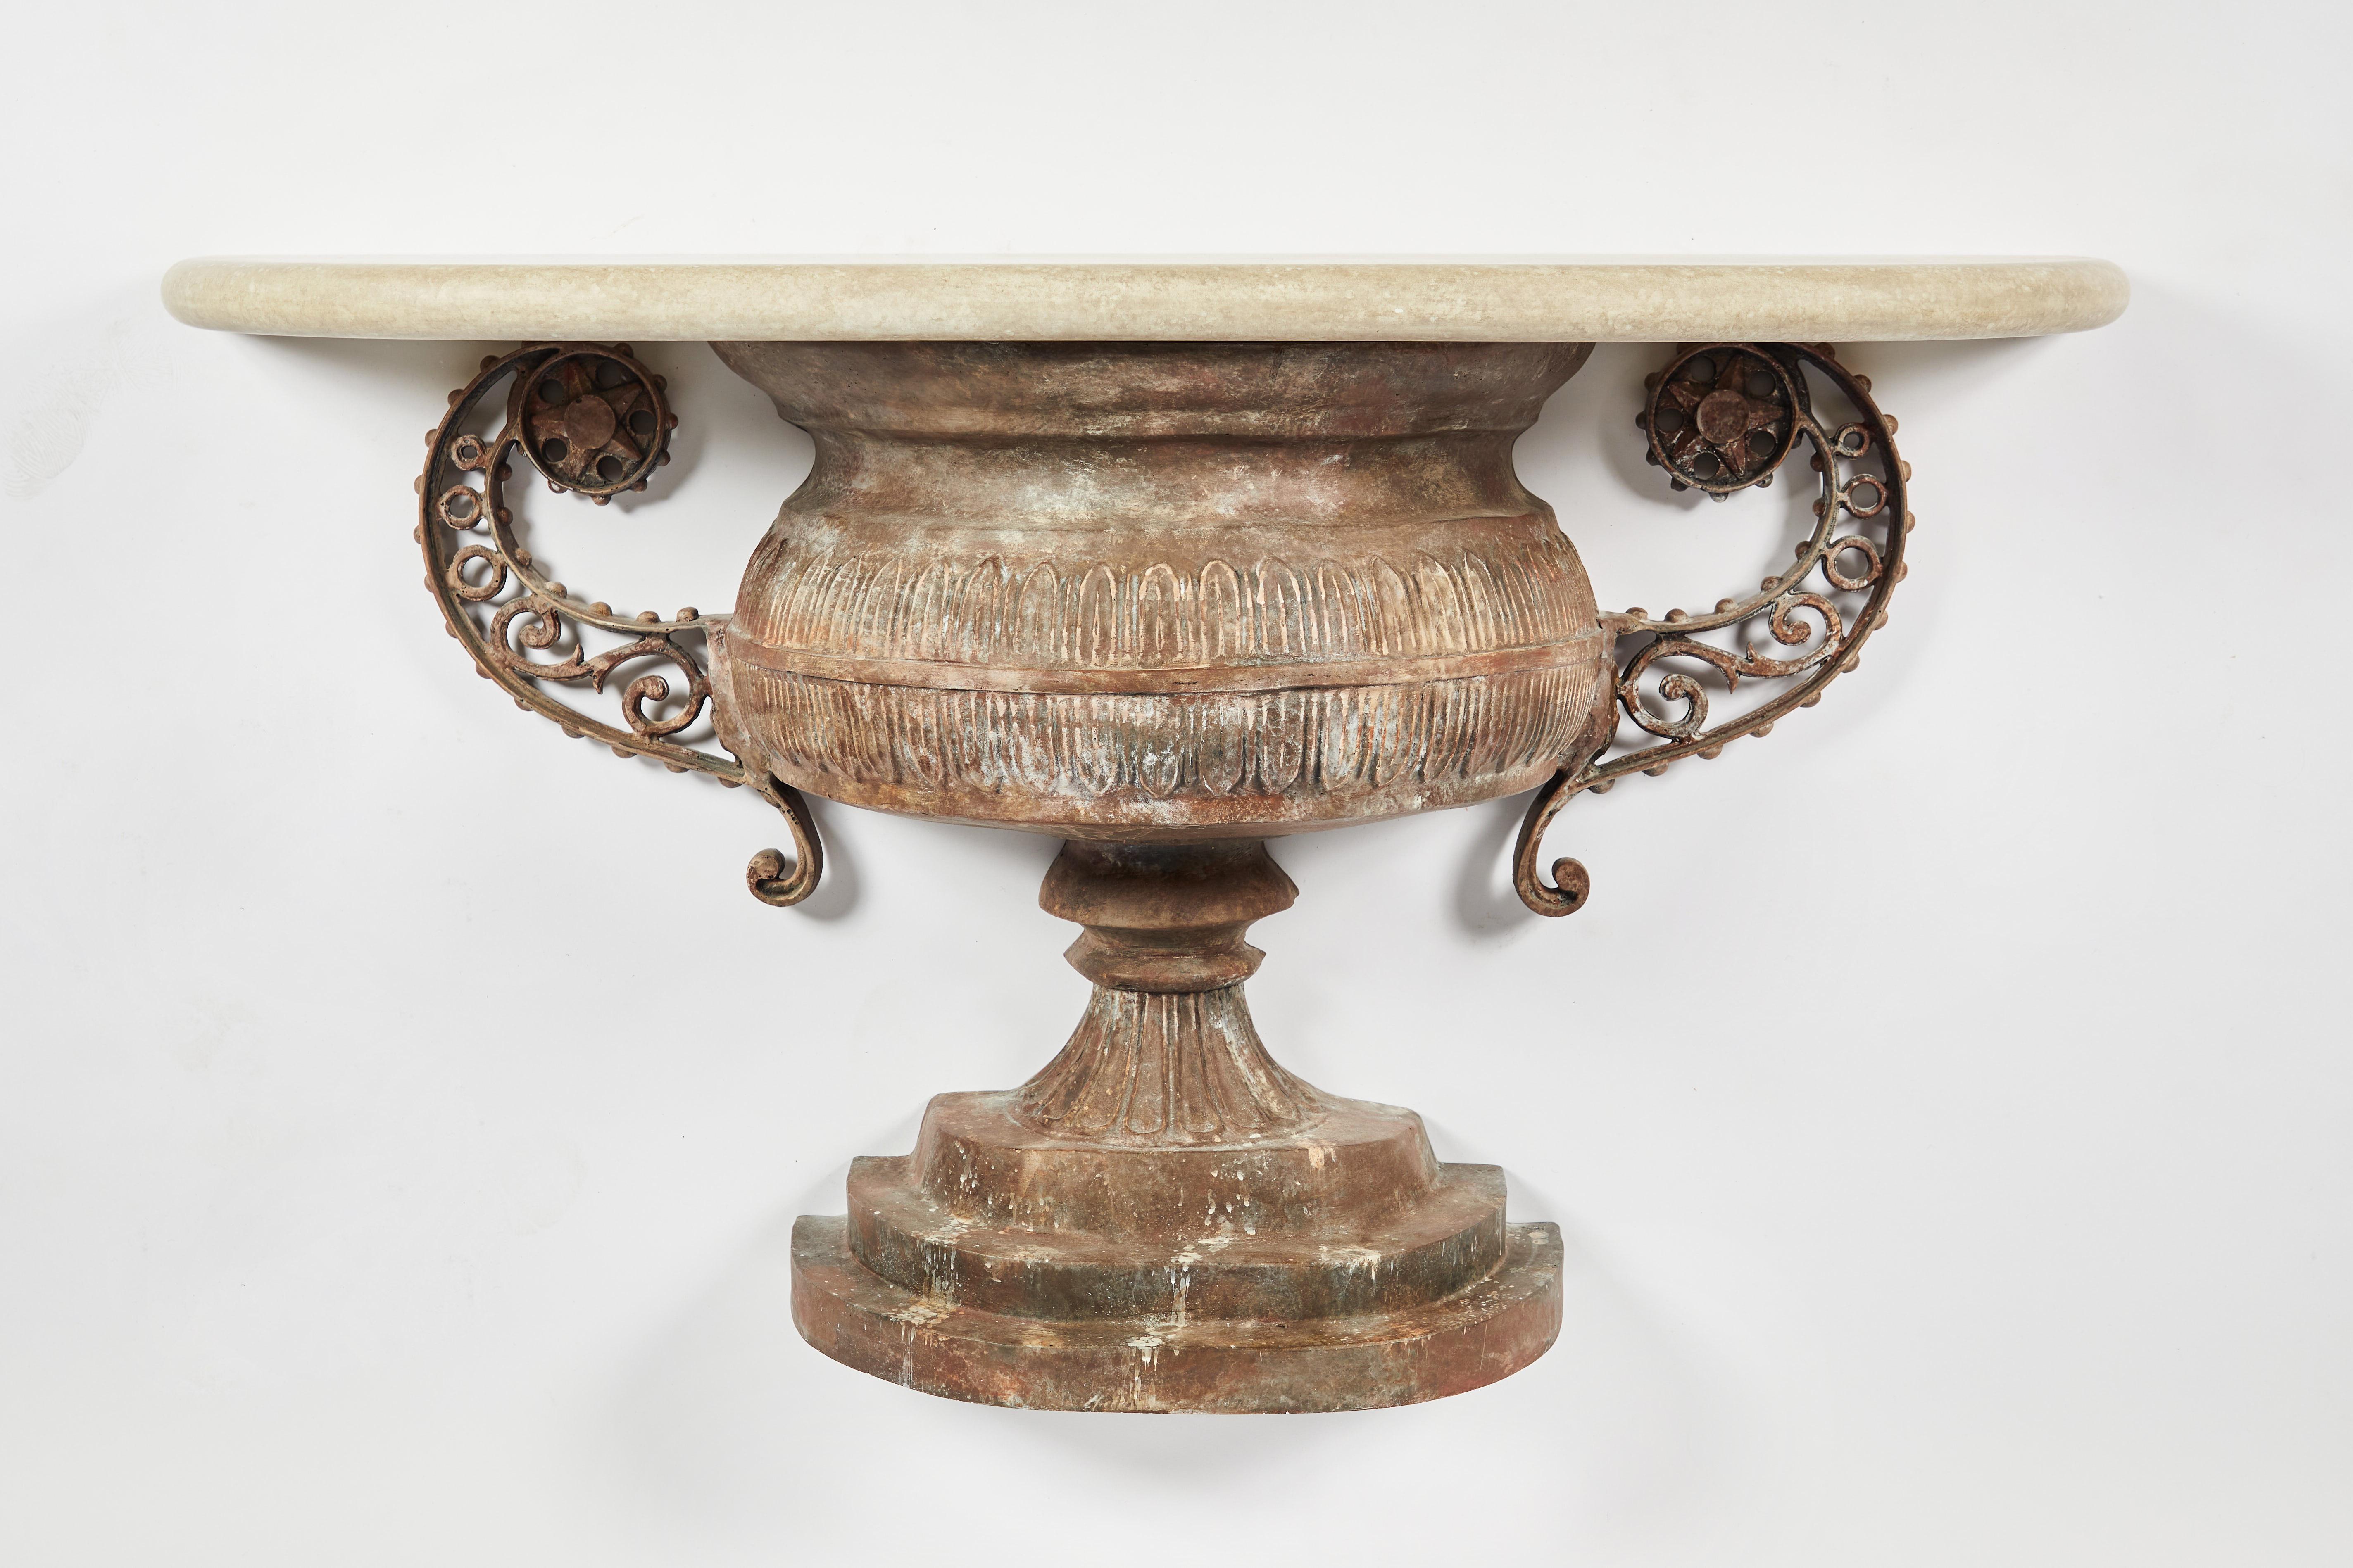 Maker: Niermann Weeks
Item: Tazza Urn console table
Materials: Cast concrete and Anglian iron.